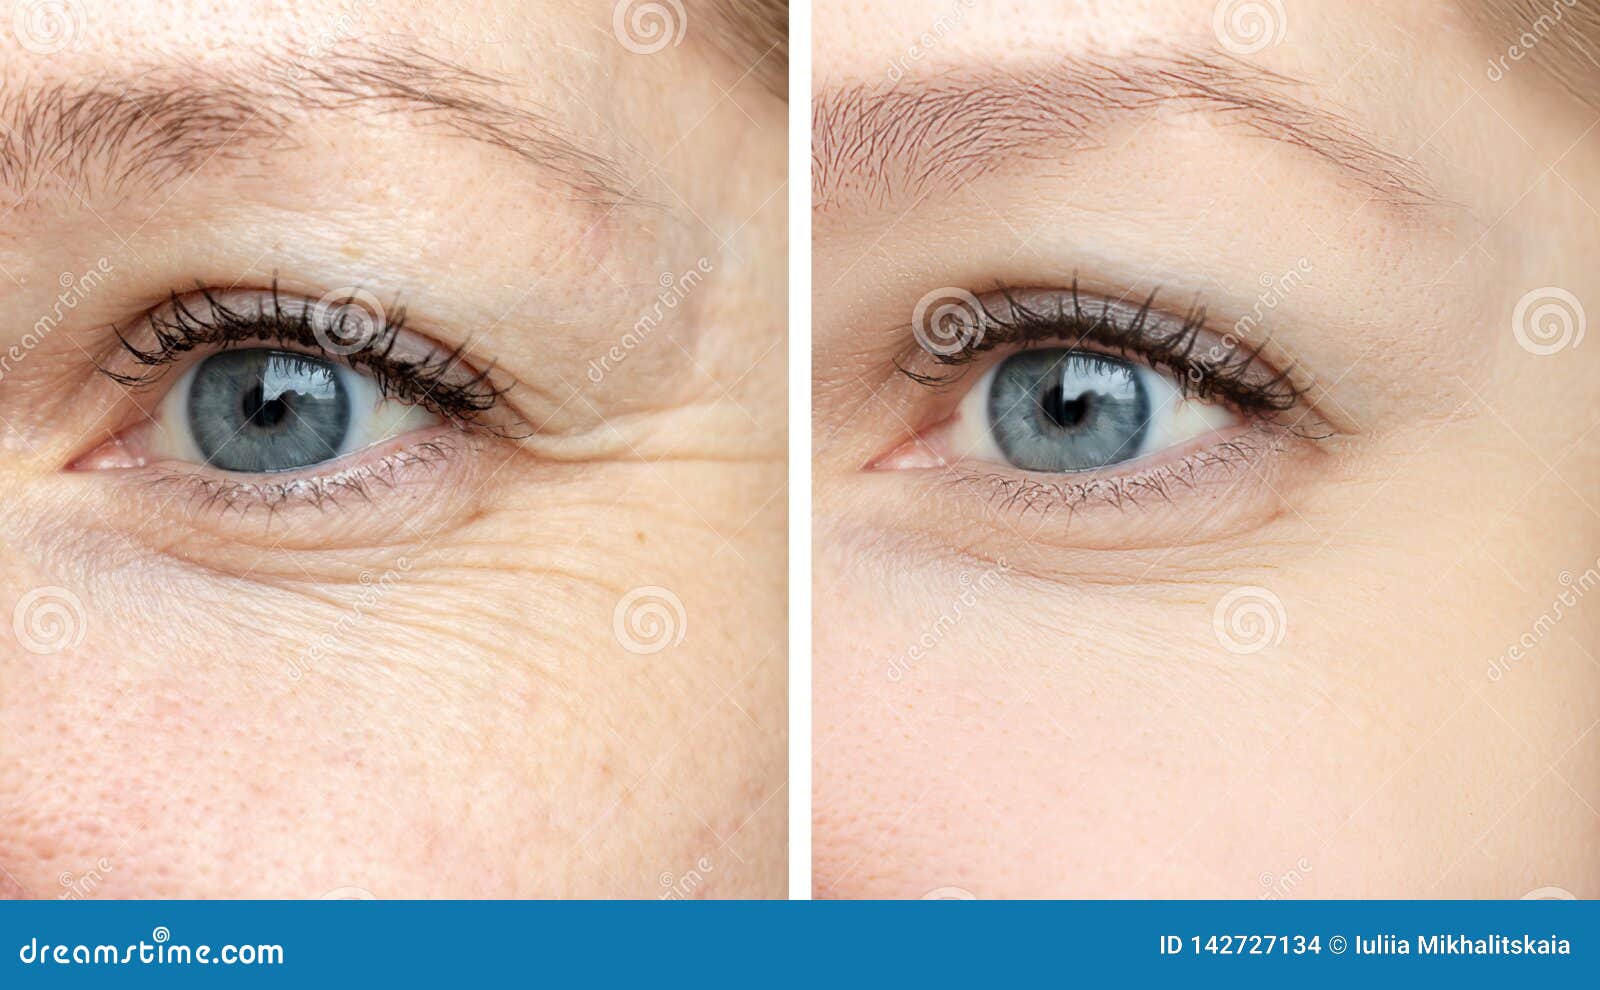 woman face, eye wrinkles before and after treatment - the result of rejuvenating cosmetological procedures of biorevitalization,